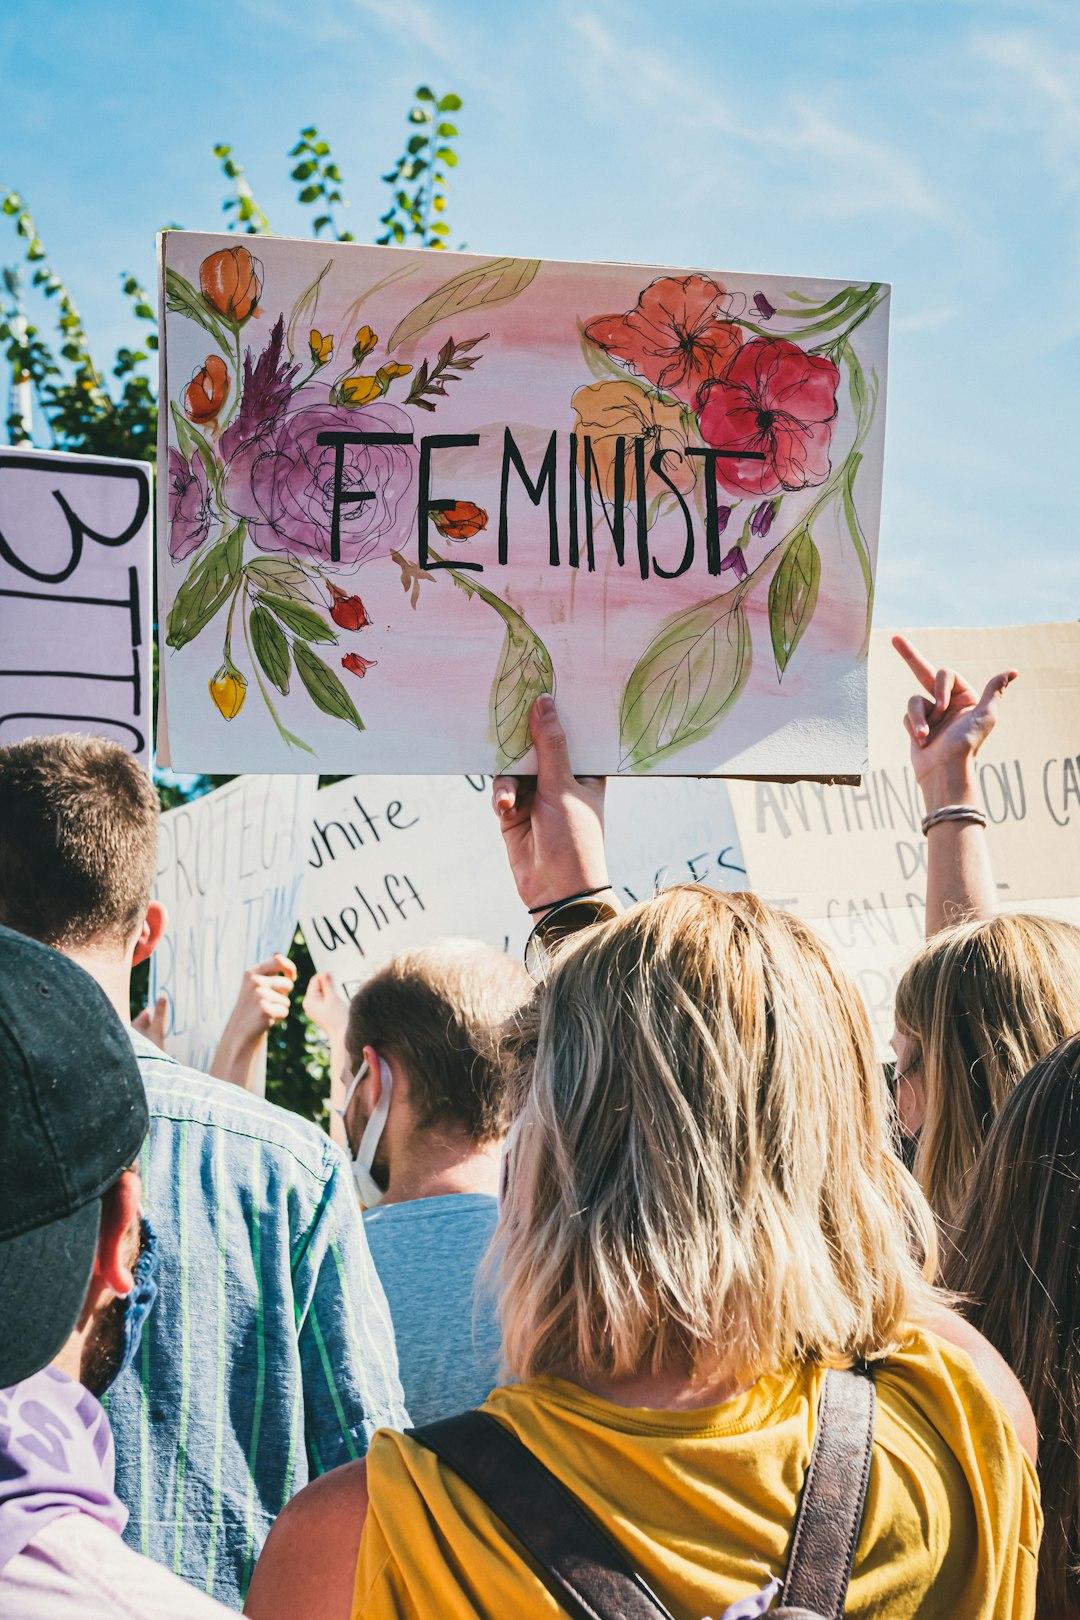 Exploring the Many Dimensions of Feminism